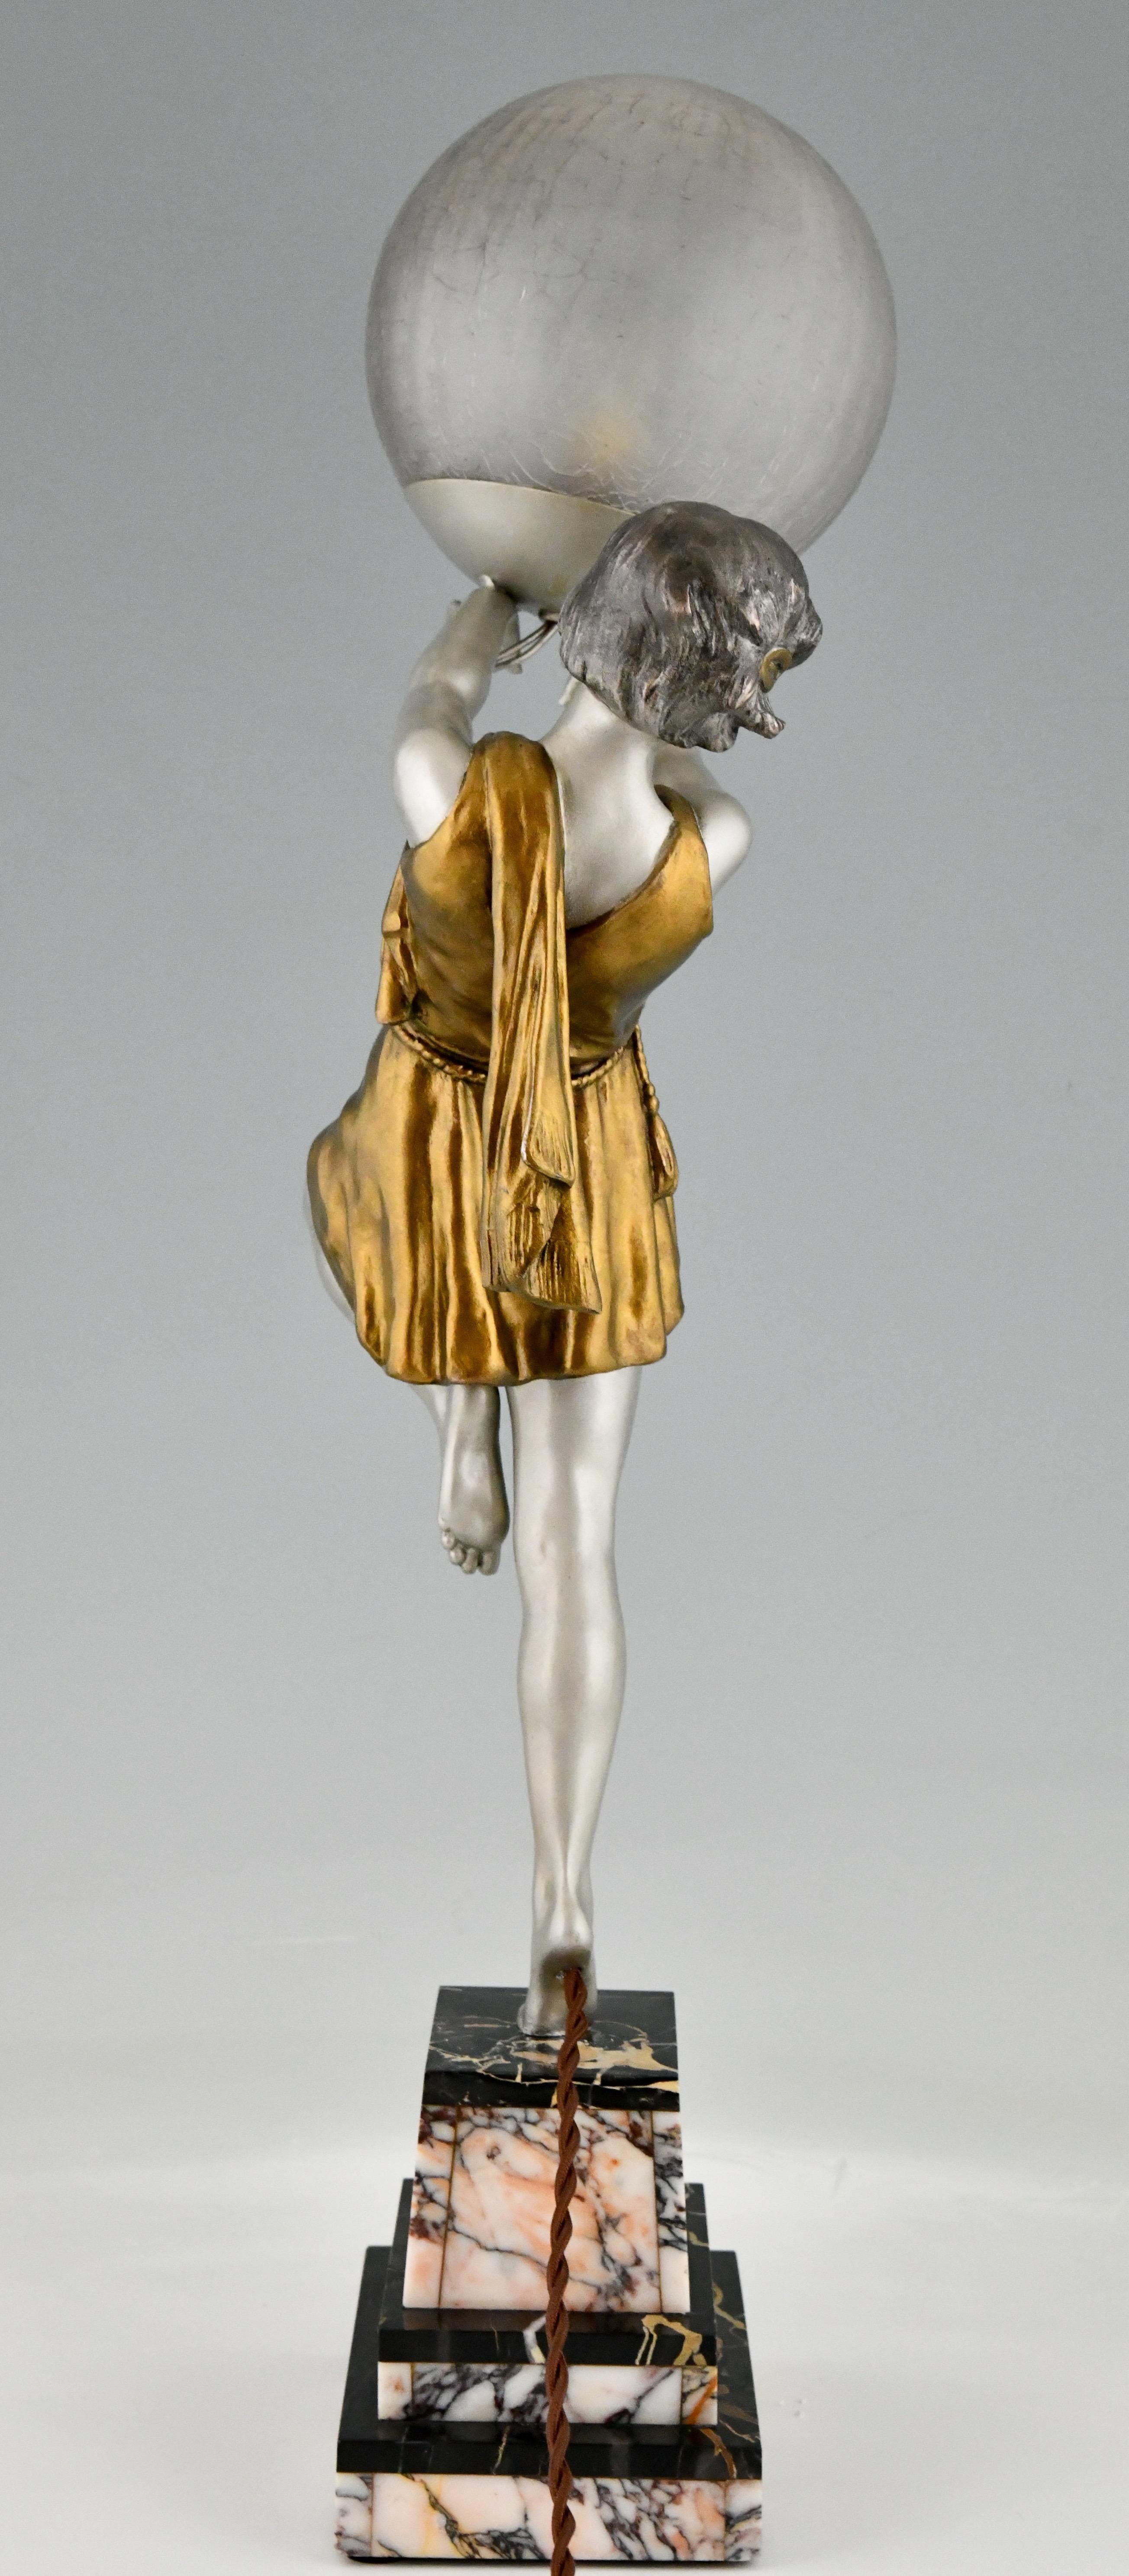 Mid-20th Century Art Deco Lamp Lady Holding a Ball Emile Carlier, France, 1930